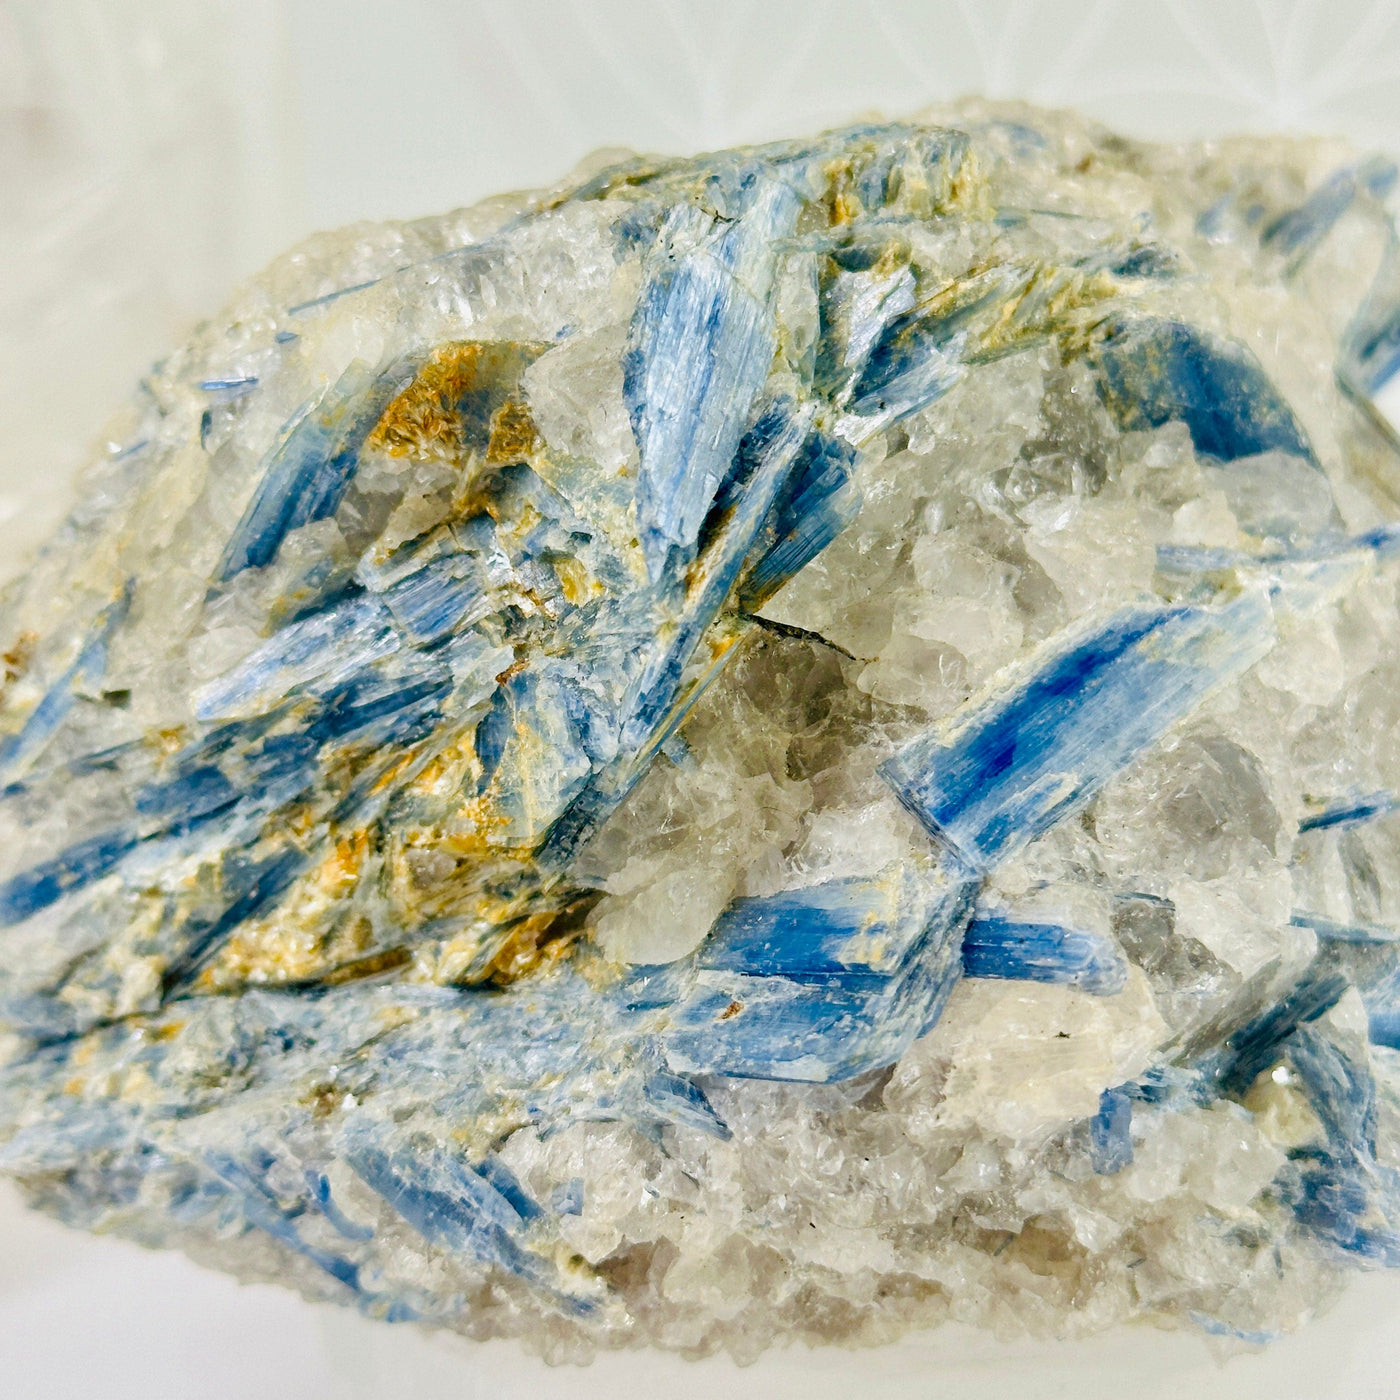 Blue Kyanite Rough Crystal Formation closeup for detail